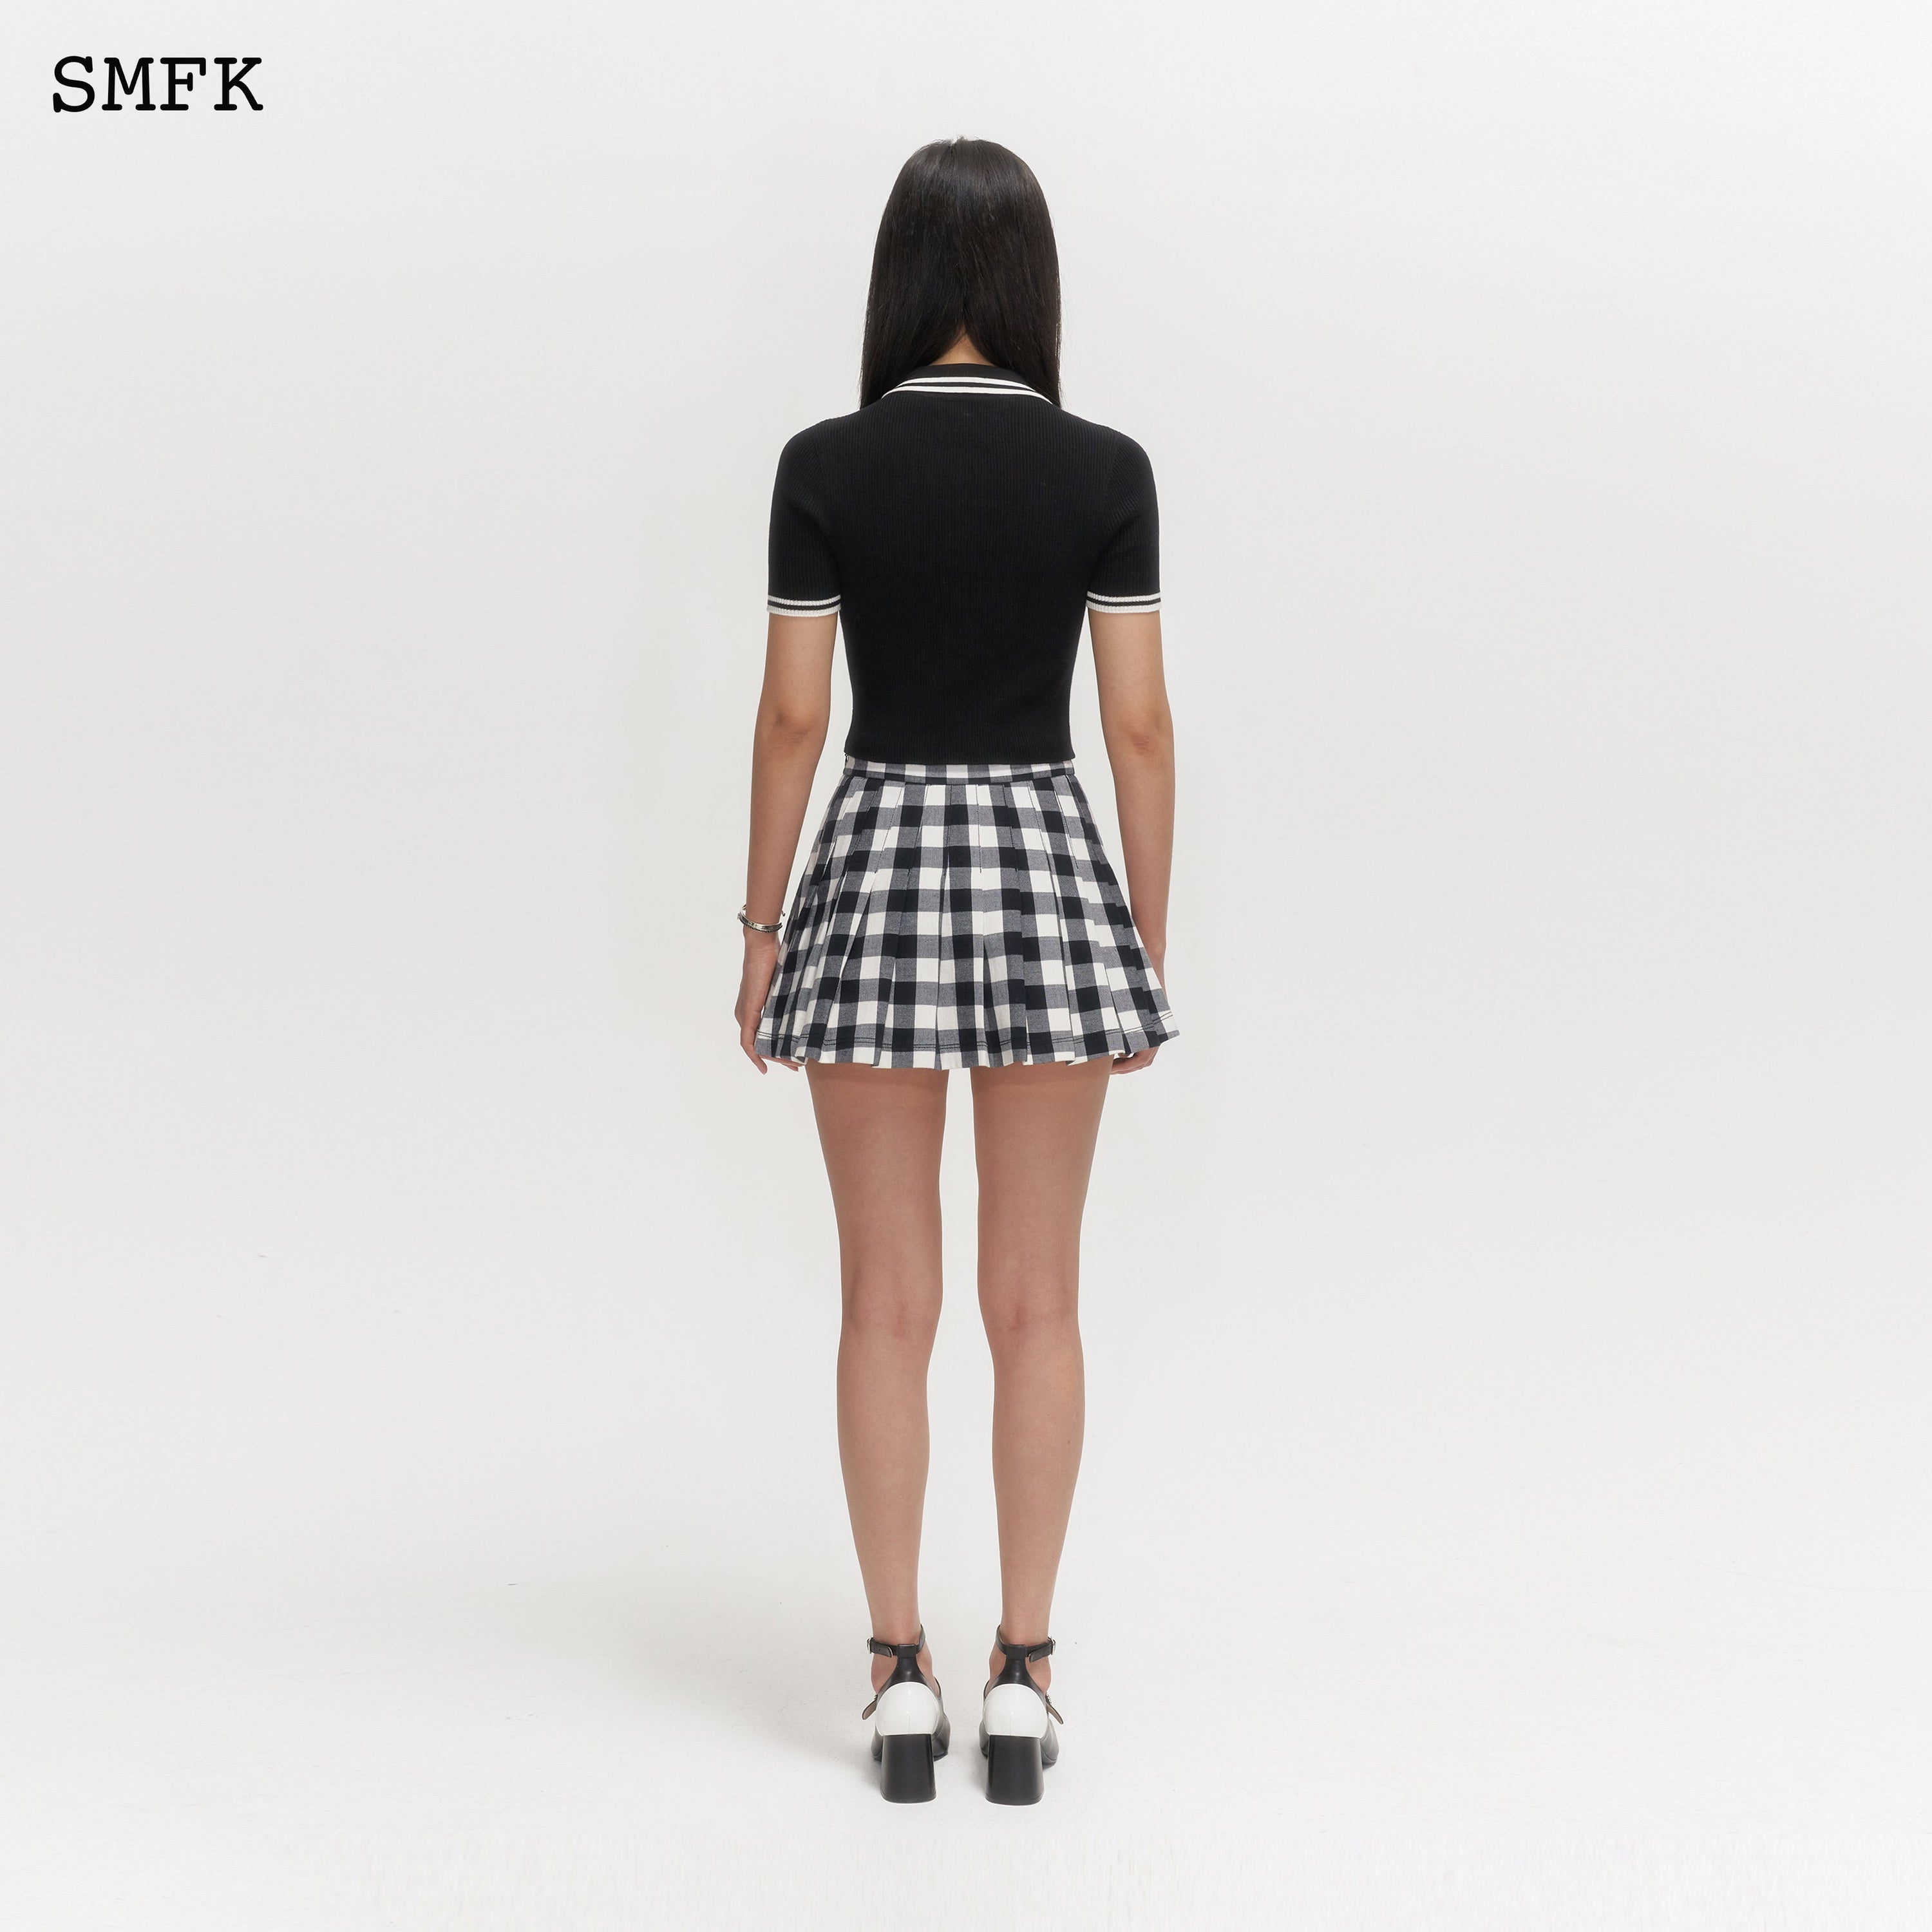 Grassland Black And White Checkered Pleated Skirt - SMFK Official